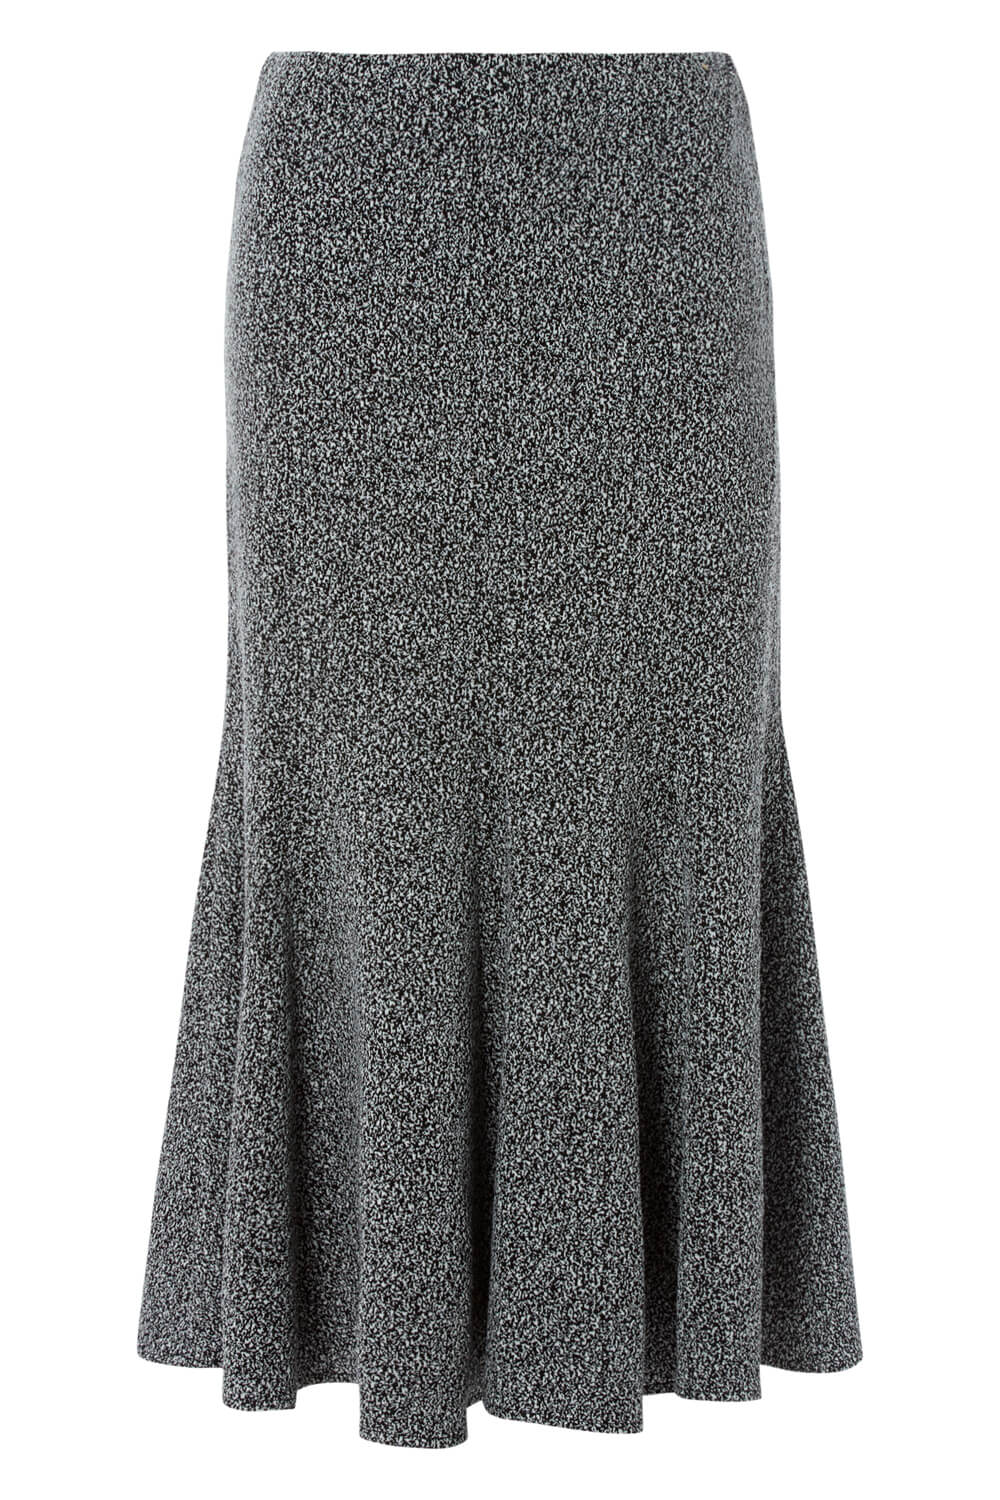 Grey Texture Flared Skirt, Image 3 of 3